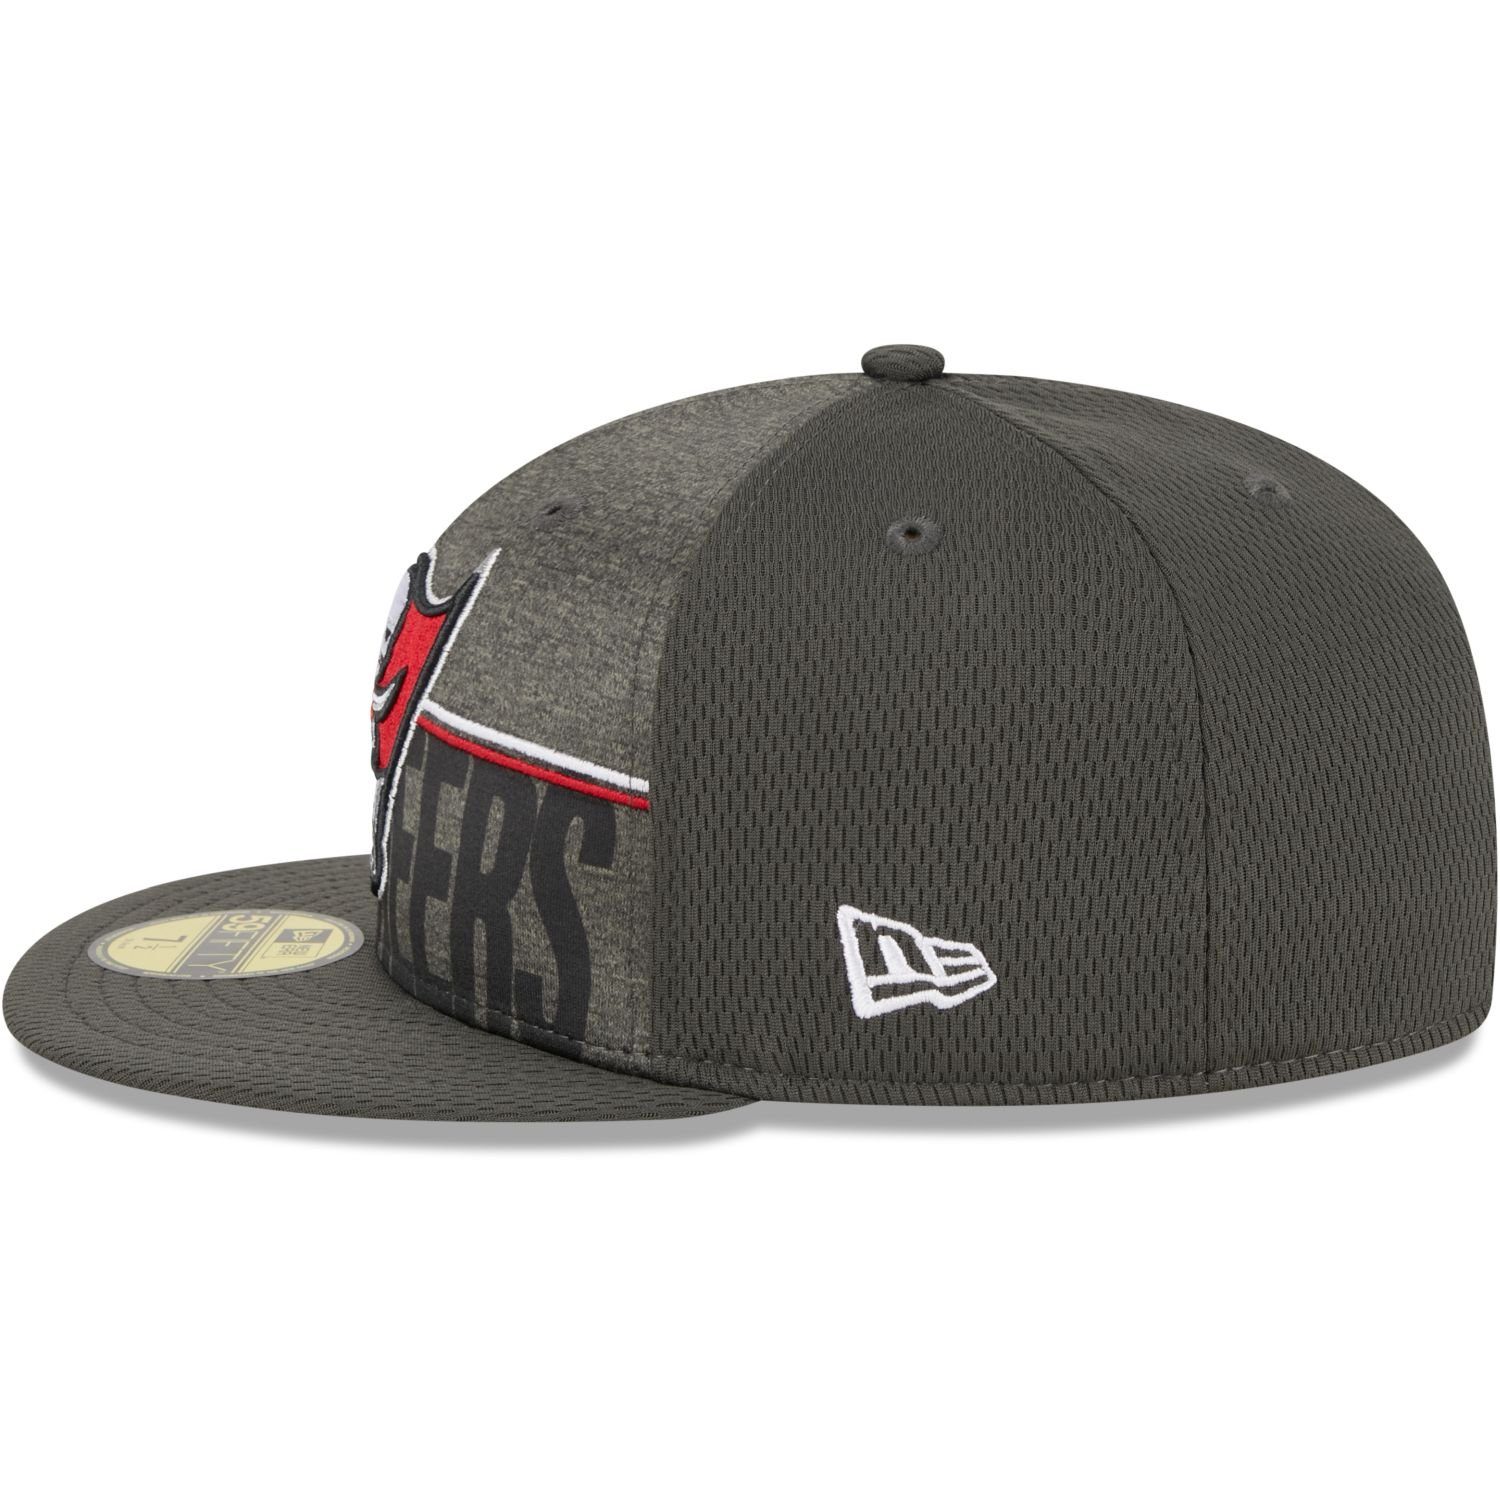 Bay Cap TRAINING New Era Buccaneers Tampa Fitted NFL 59Fifty